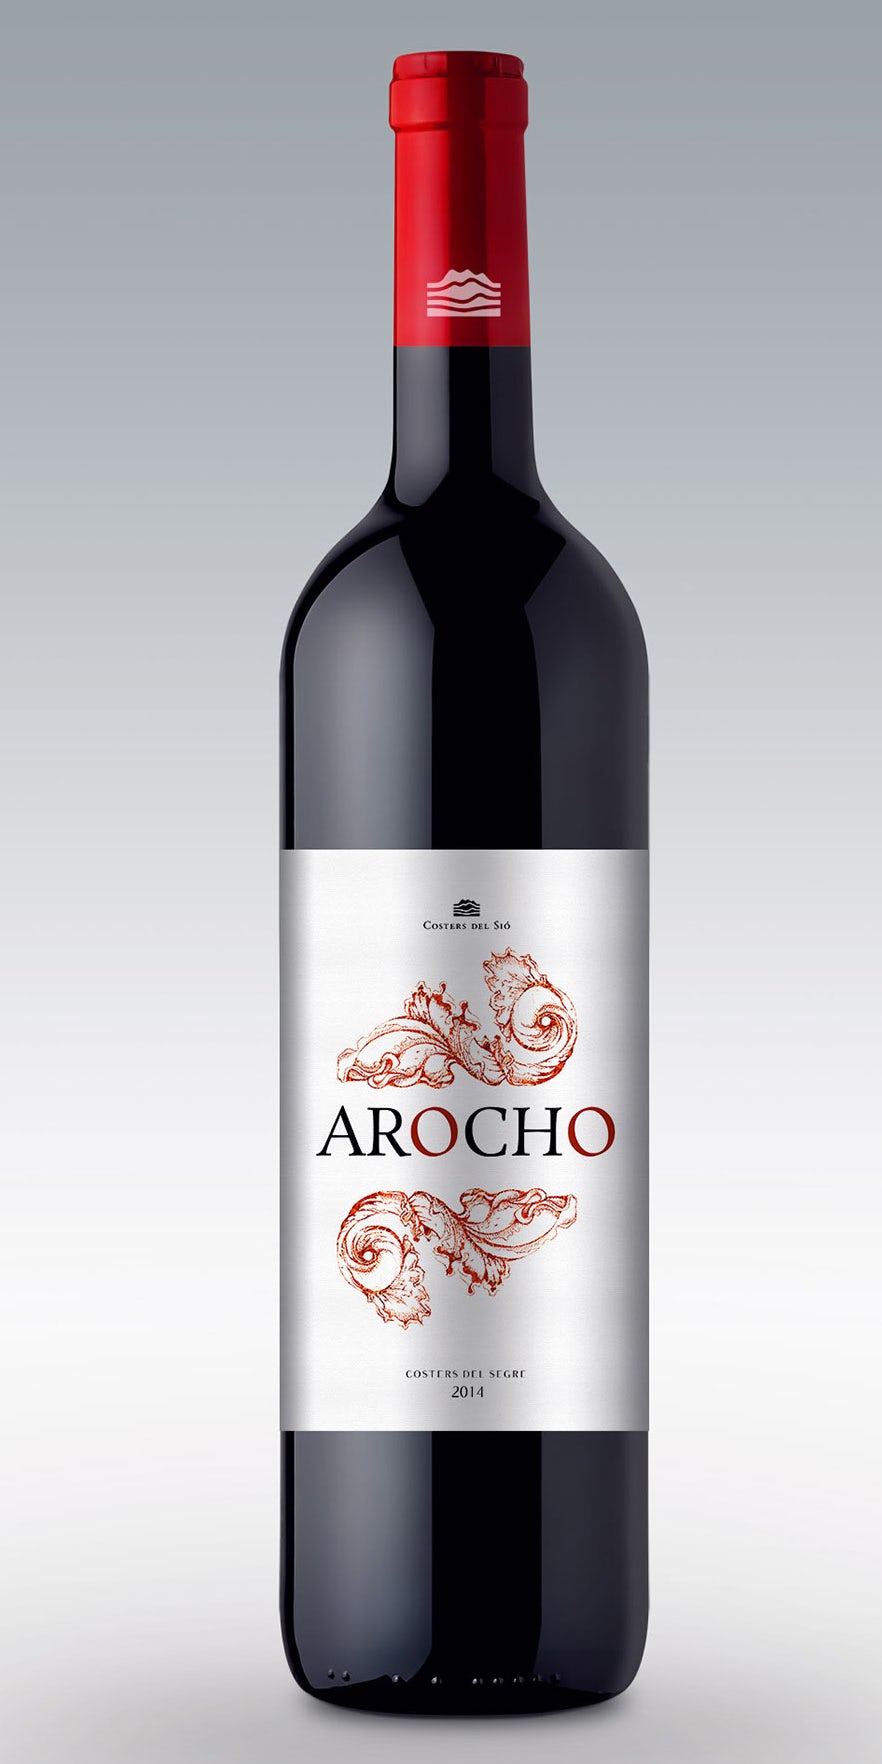 Bold and red traditional wine label